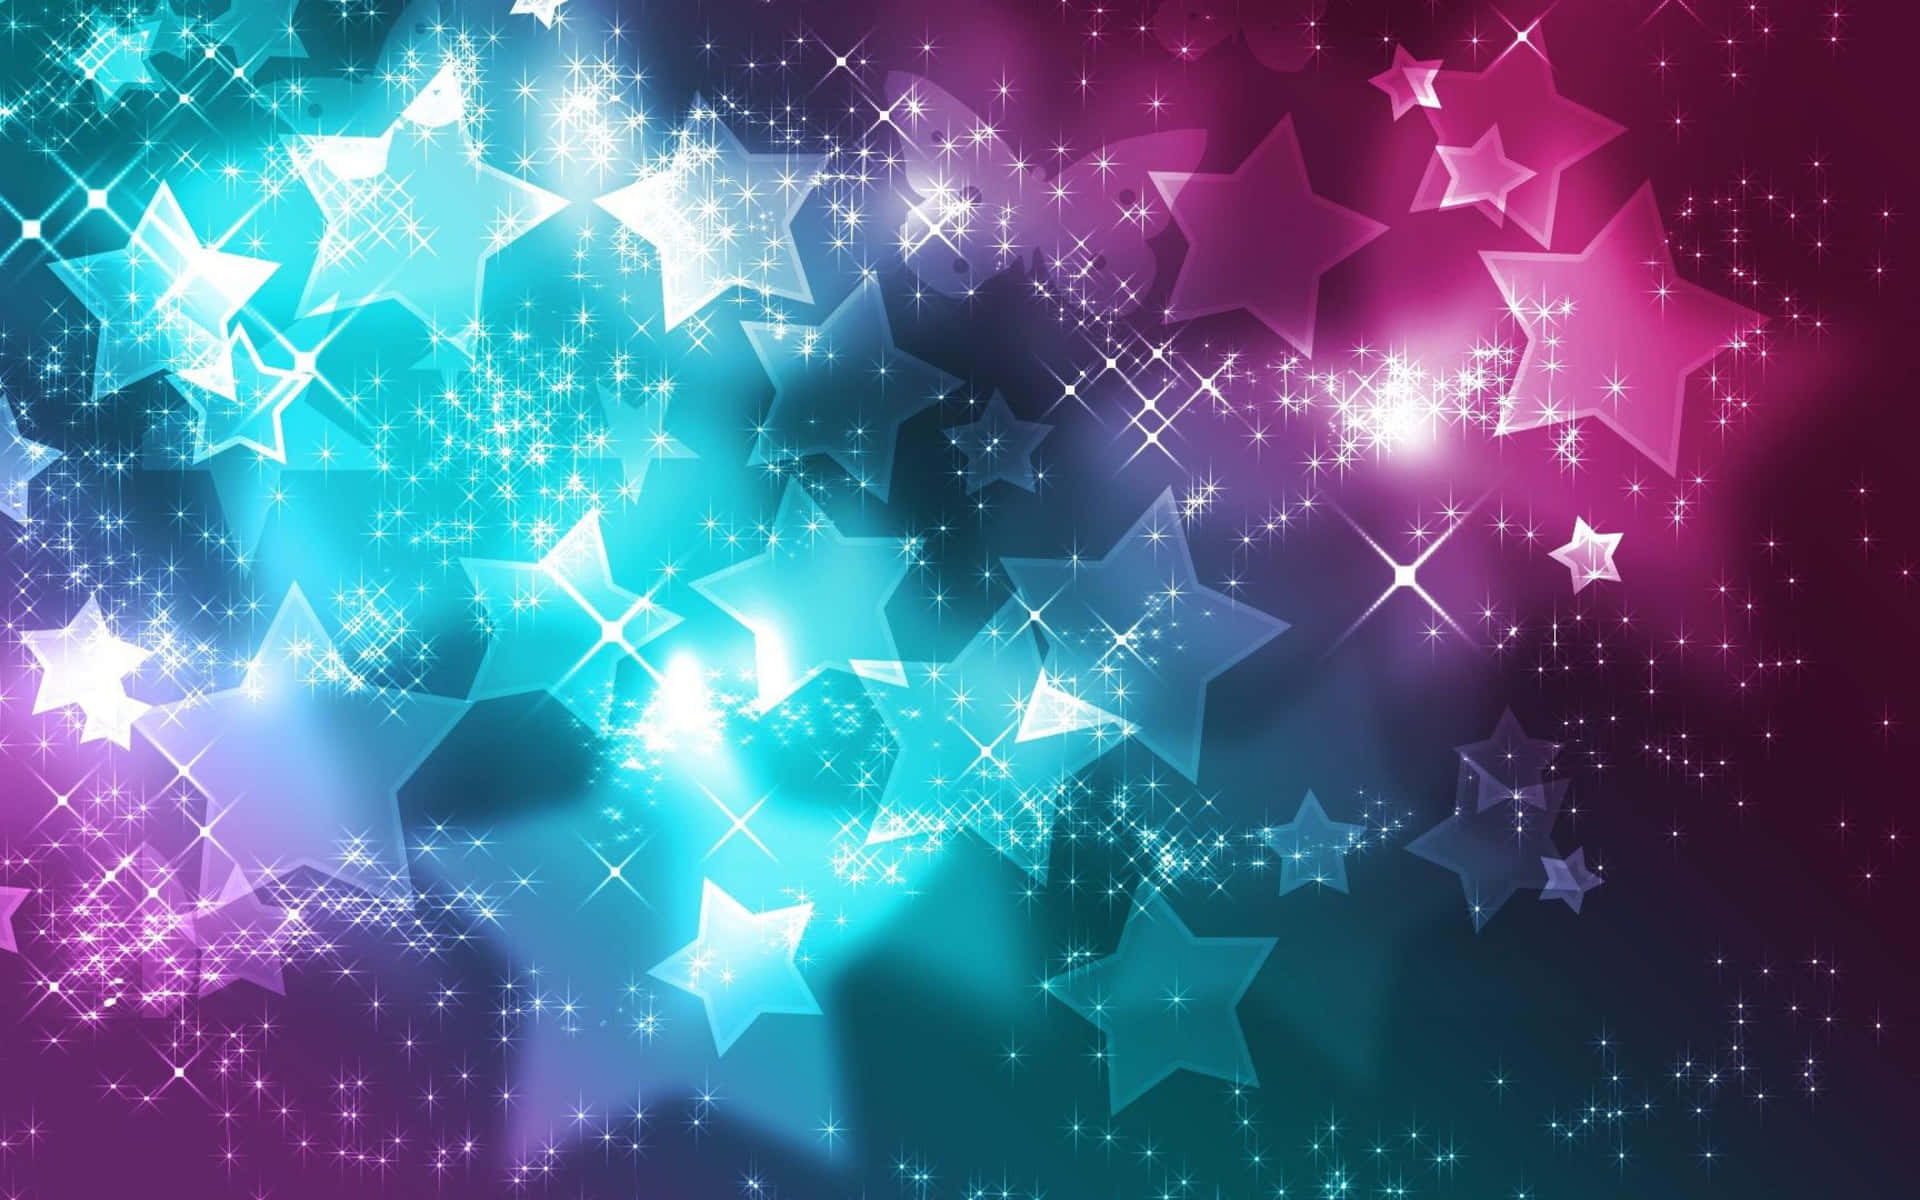 A Beautiful Image Of A Shining Star Made From A Stunning Array Of Colors. Background